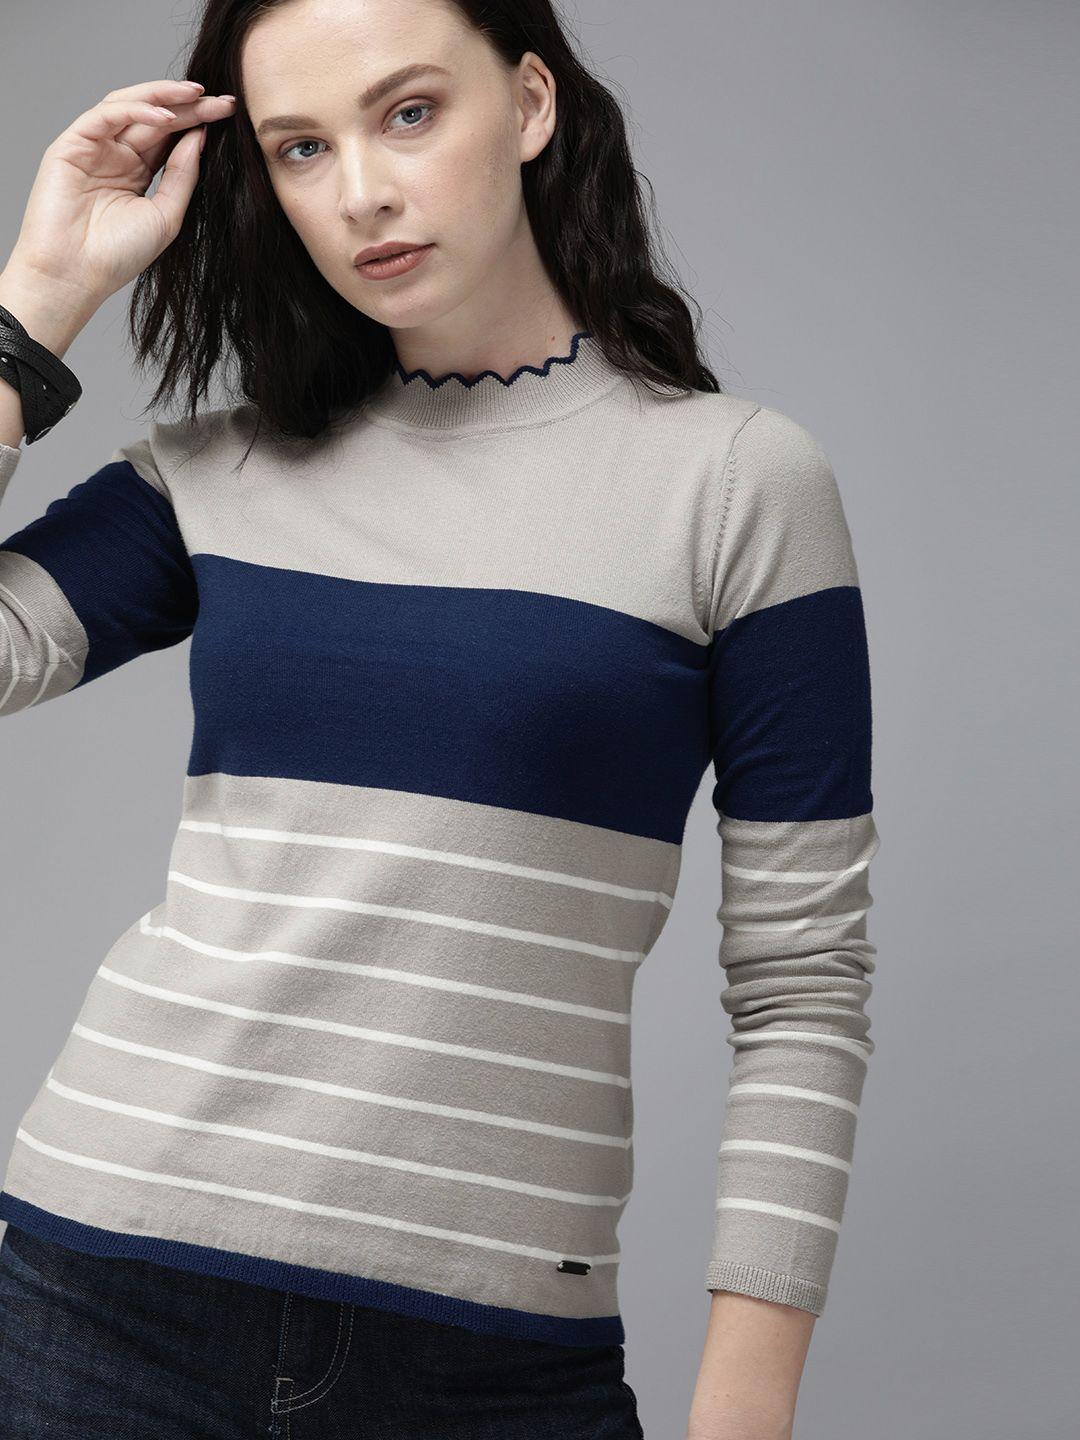 the roadster lifestyle co women grey melange & white striped regular top with lettuce edge detail